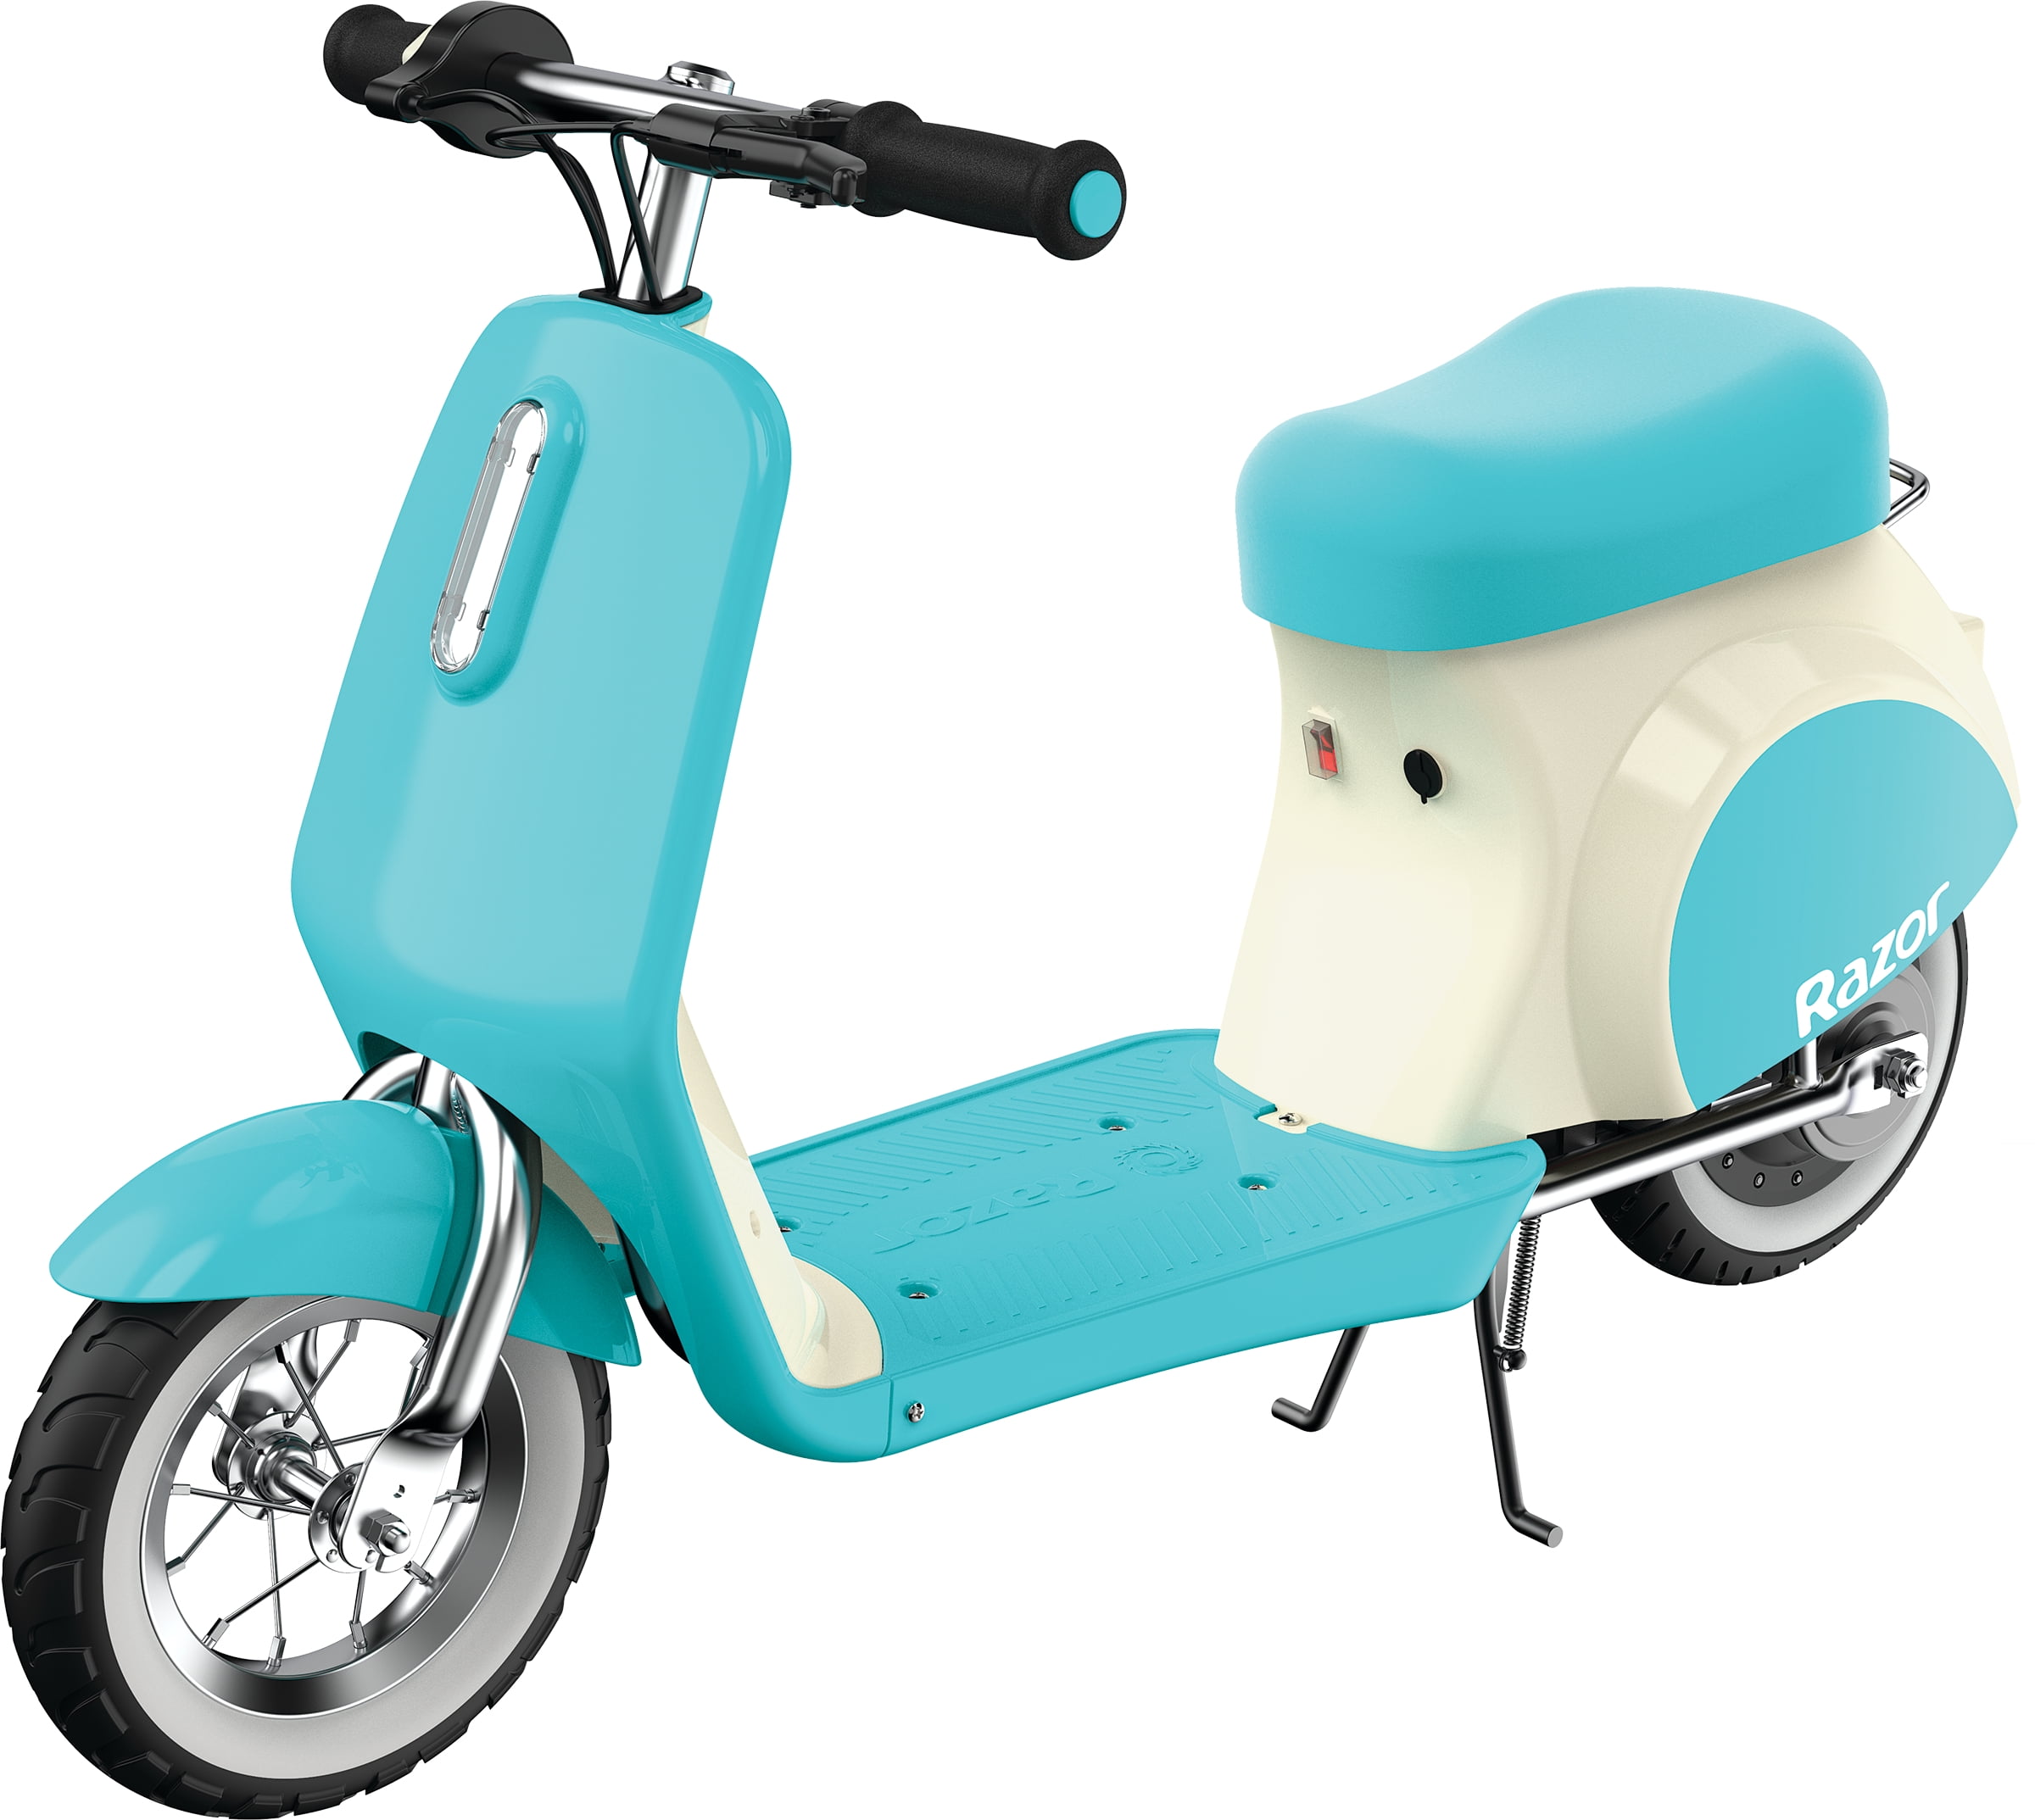 frijoles apertura parrilla Razor Pocket Mod Petite - 12V Miniature Euro-Style Electric Scooter for  Girls Ages 7+, Hub-Driven Motor, Air-Filled White Wall Tires, Up to 40 min  Ride Time - Walmart.com